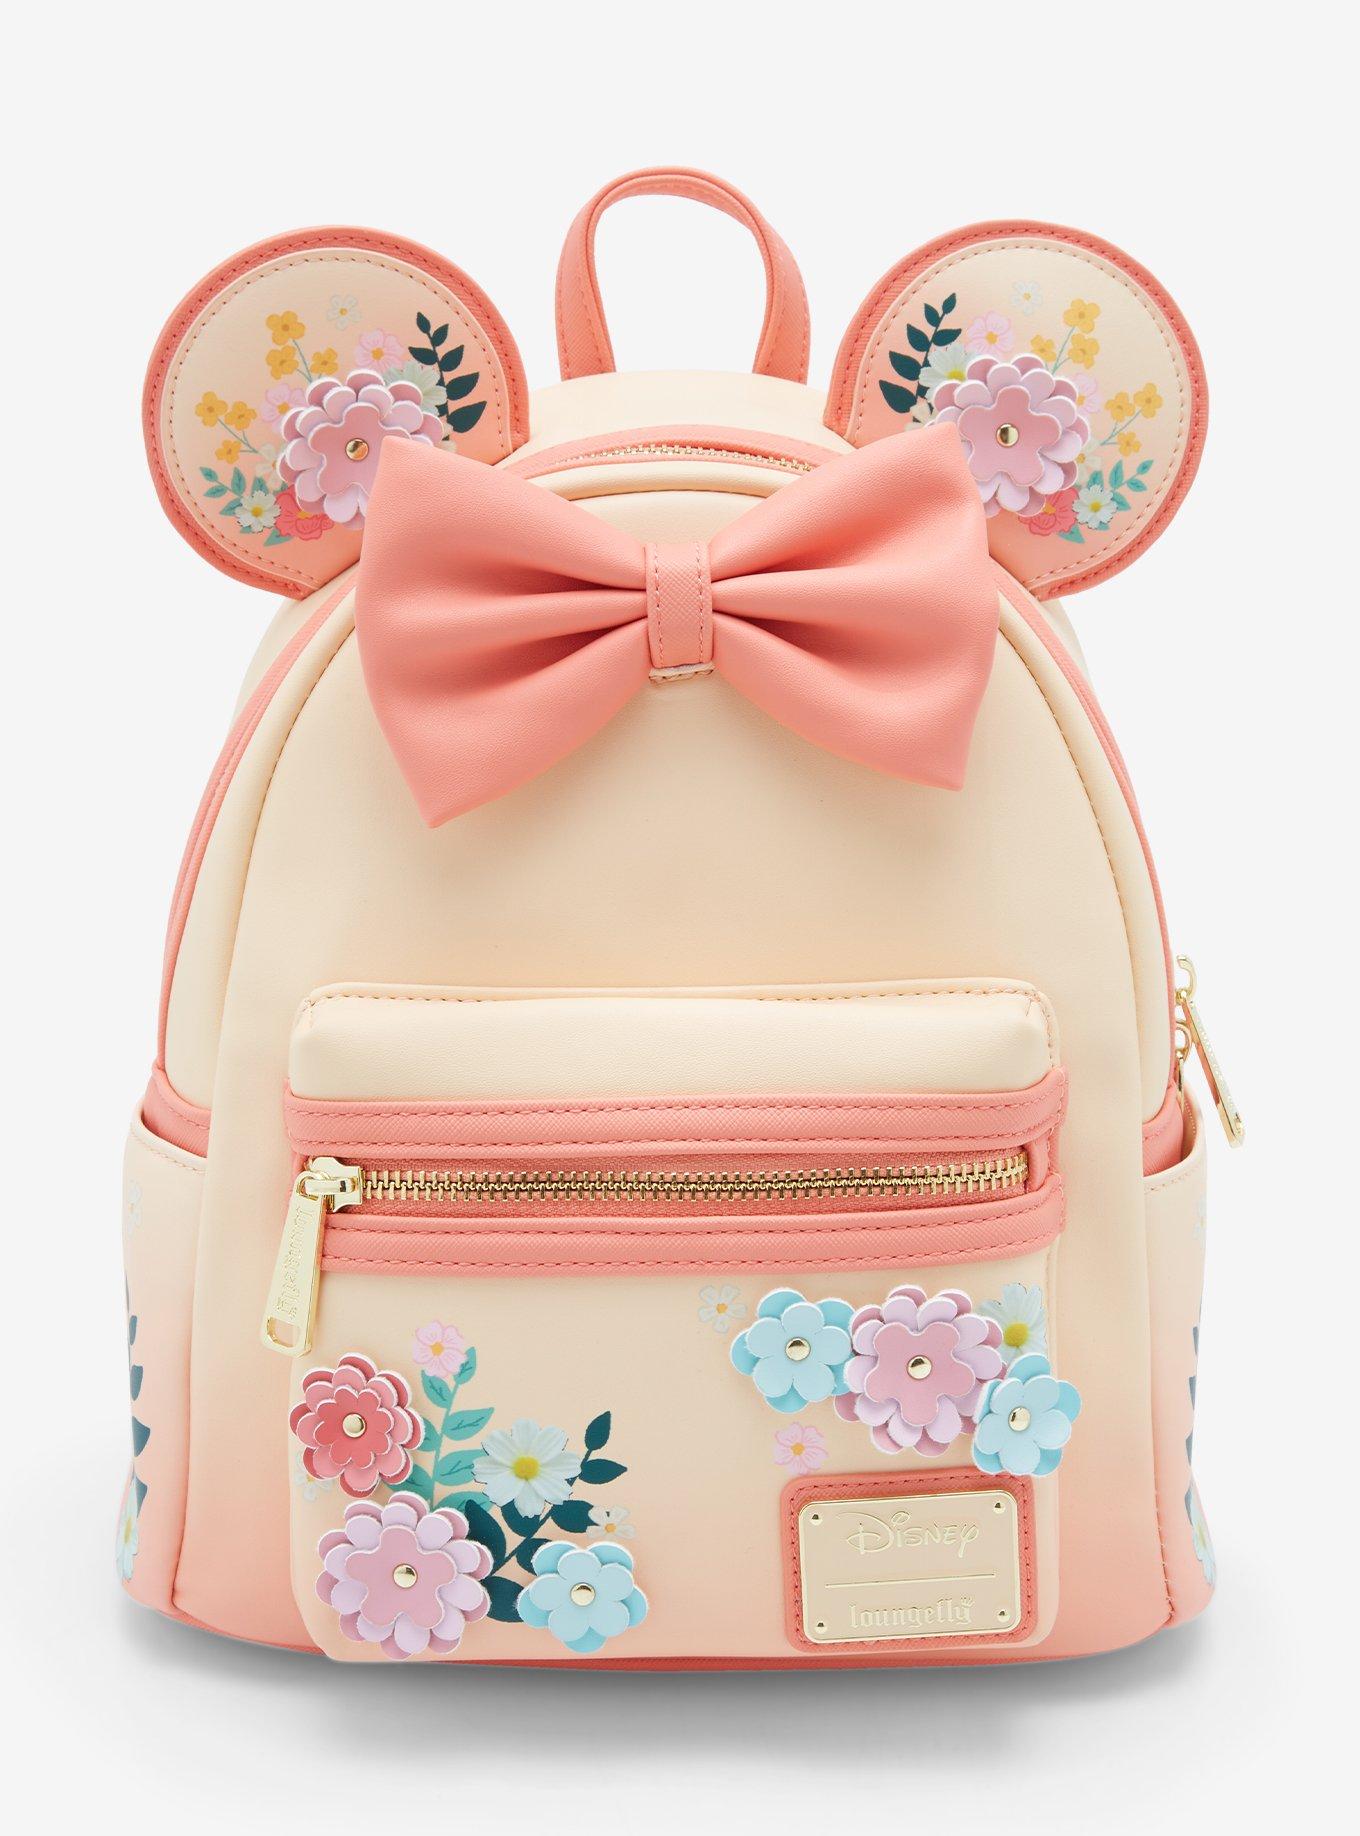 PHOTOS: New Minnie Mouse Loungefly Mini Backpack Spotted at Disney